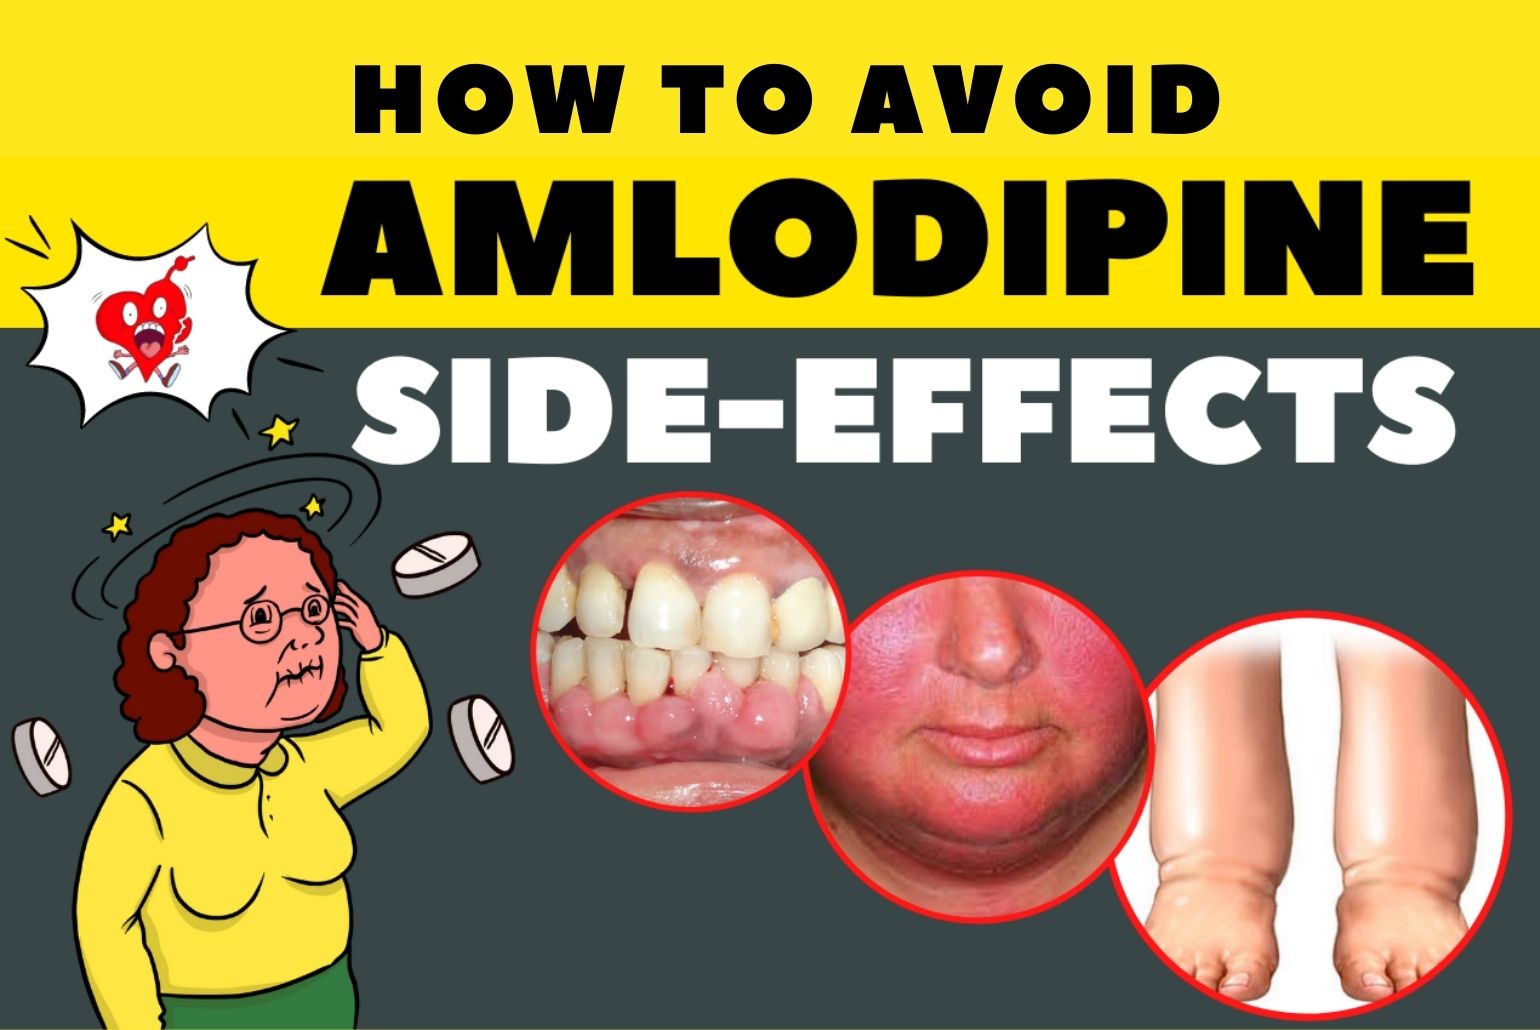 amlodipine-side-effects-how-to-prevent-medinaz-blog